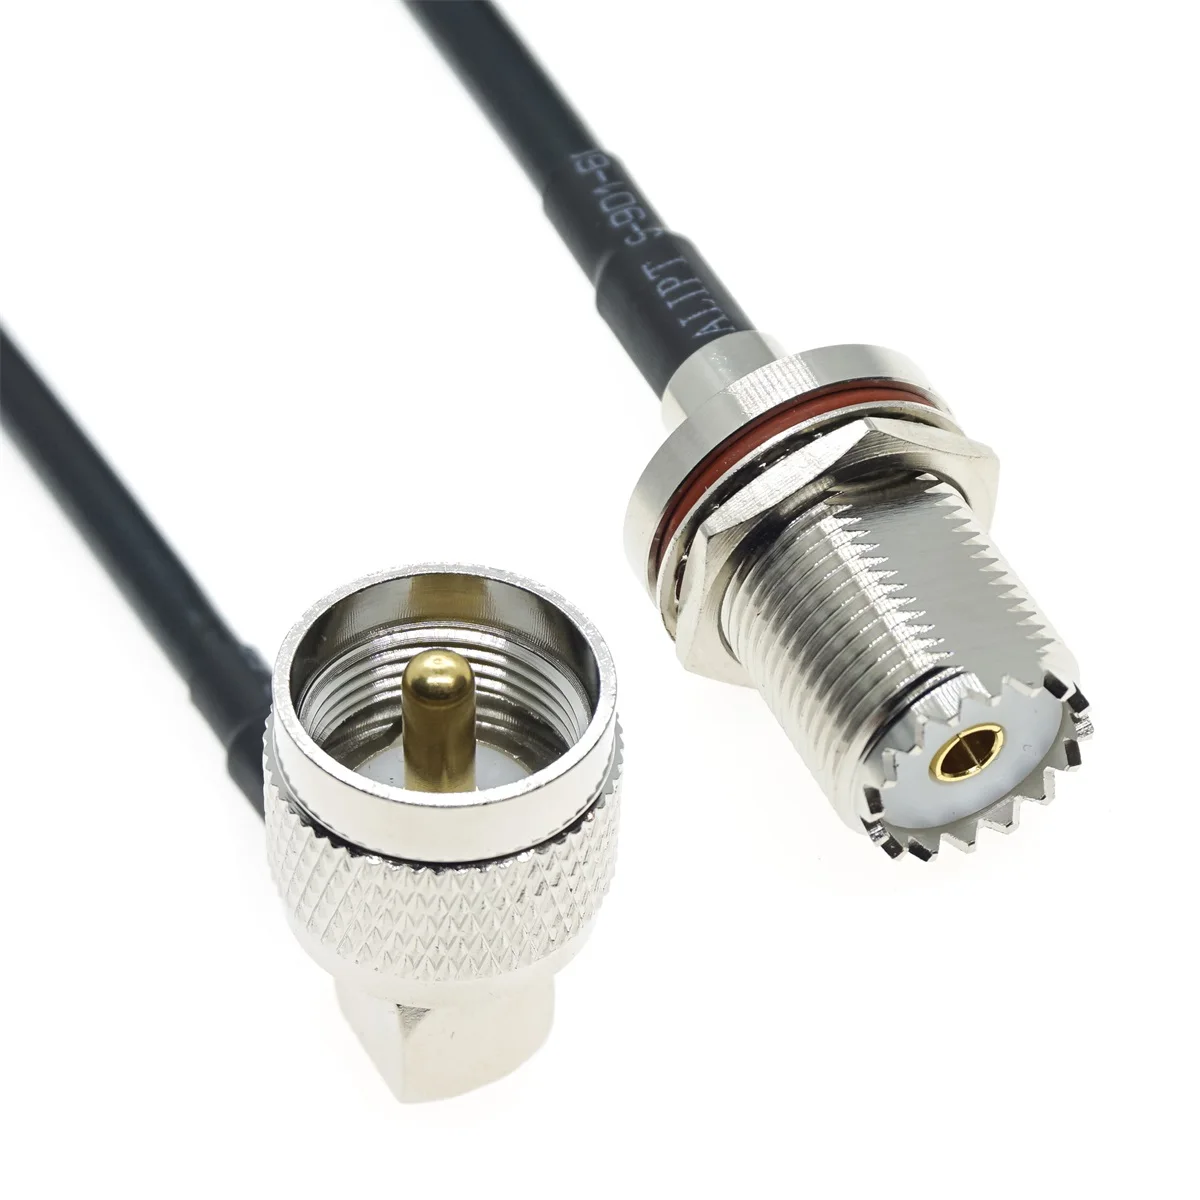 UHF Cable RG58 UHF Female Bulkhead SO239 to UHF Male Right Angle Coaxial Cable PL 259 WiFi Antenna Extension Cable 30cm 1M 5M